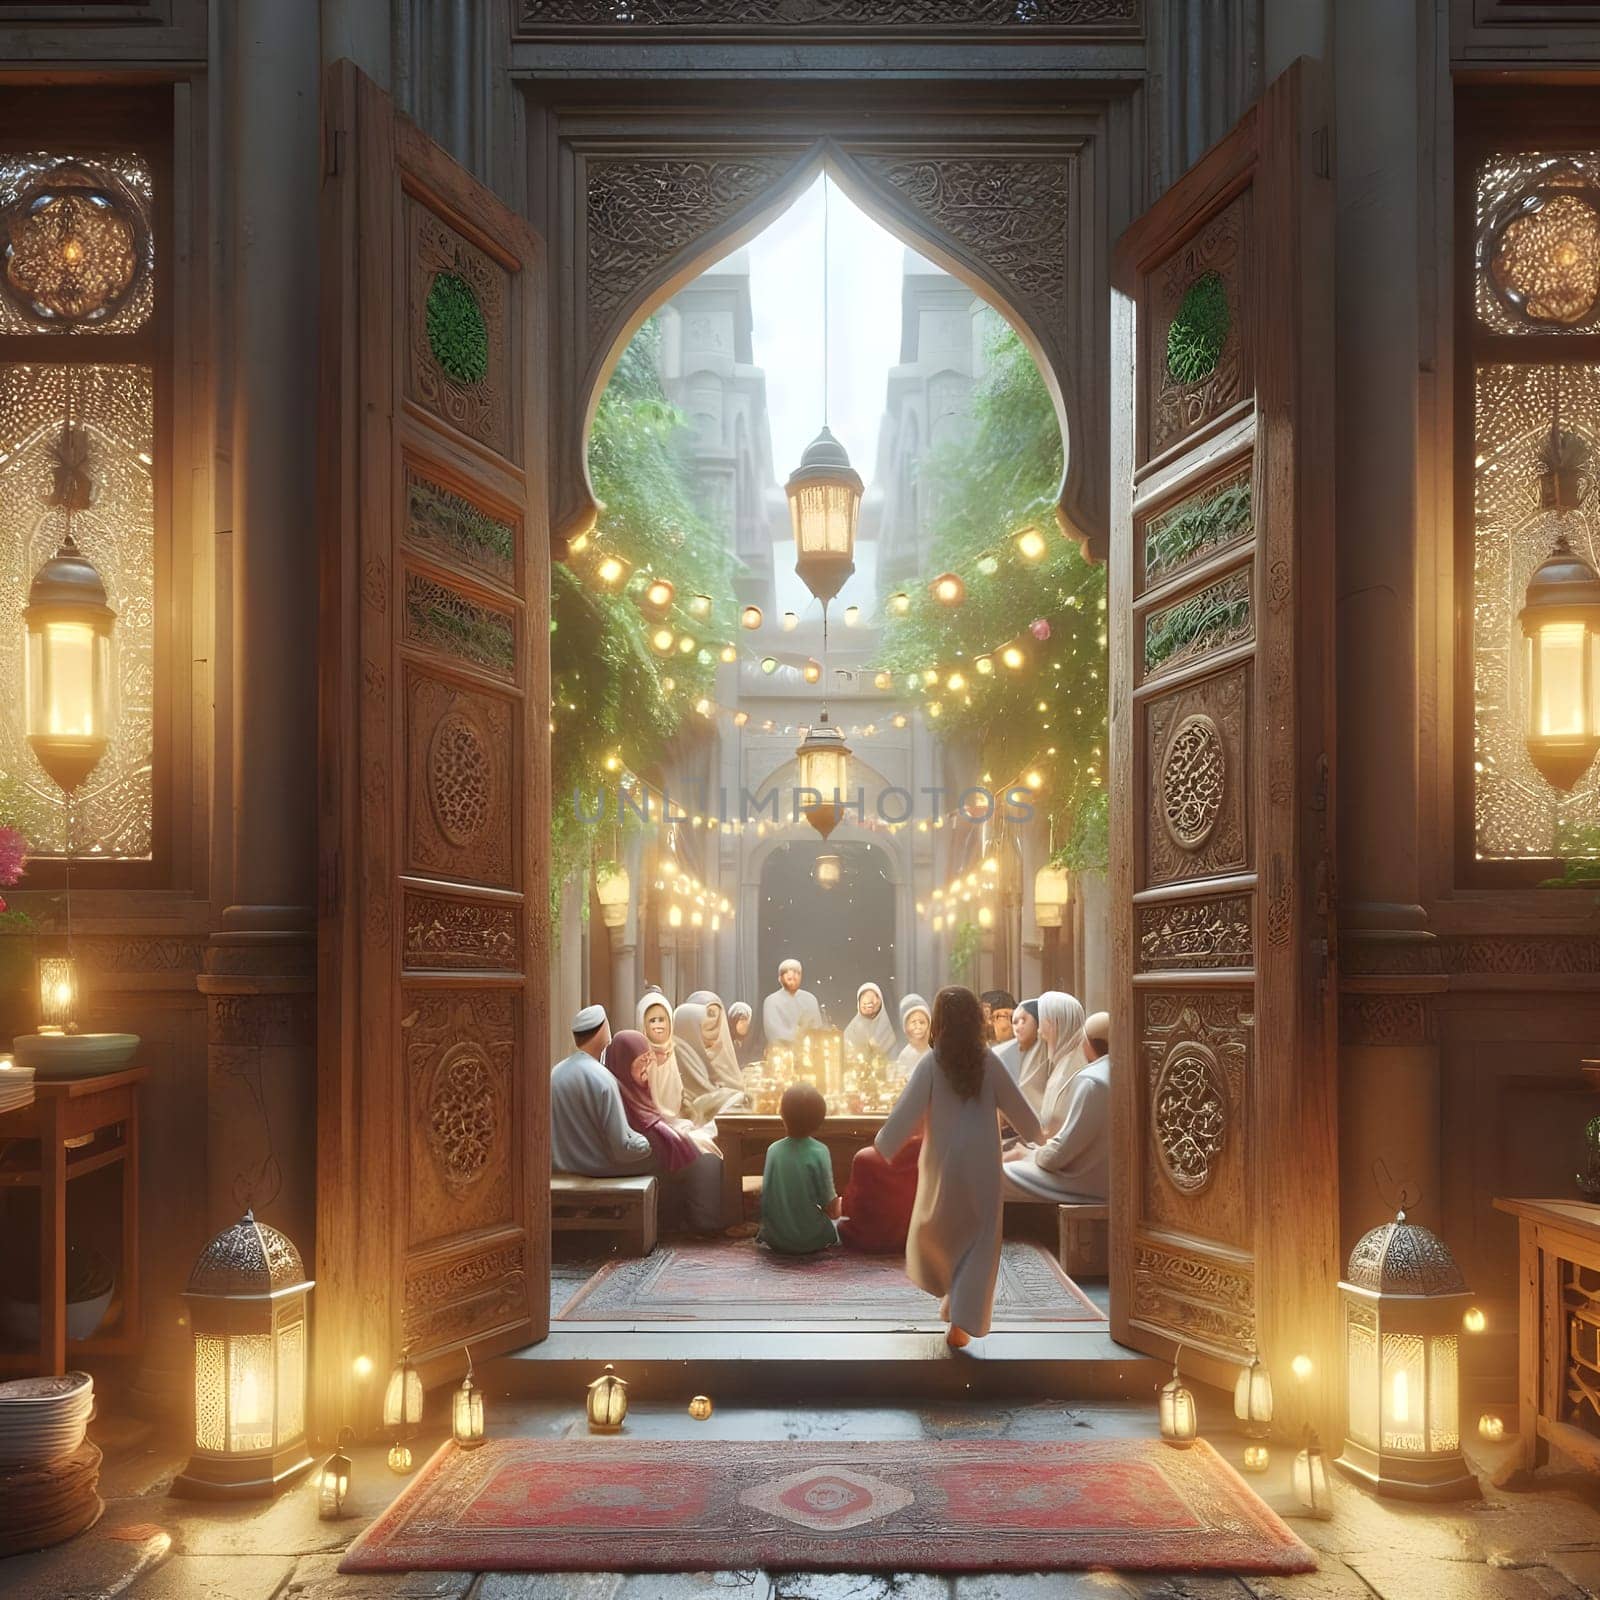 An old, weathered door opens to a courtyard adorned with Ramadan lanterns, as a family welcomes guests for Iftar 4k, photorealistic . High quality photo